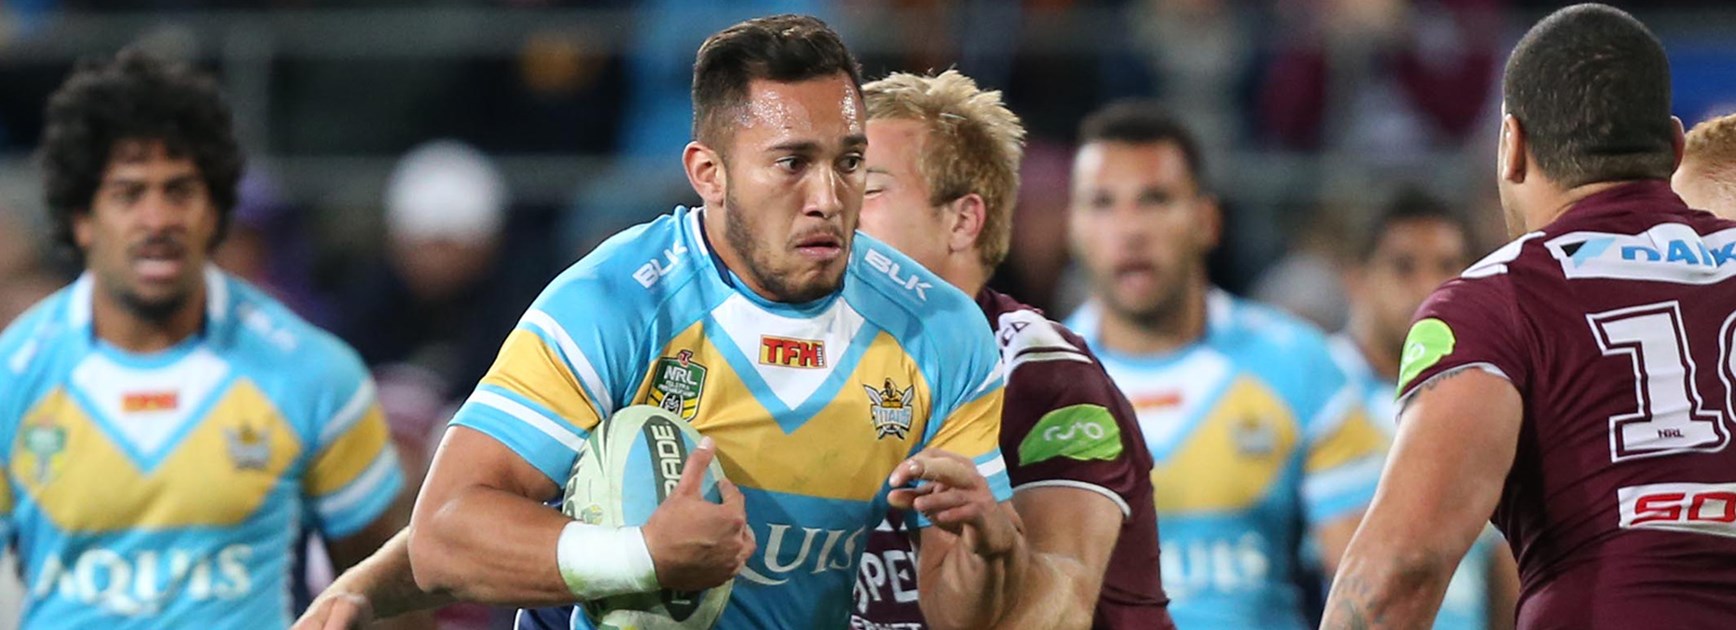 Gold Coast's Nathaniel Peteru scored a try on his NRL debut against Manly in Round 18.